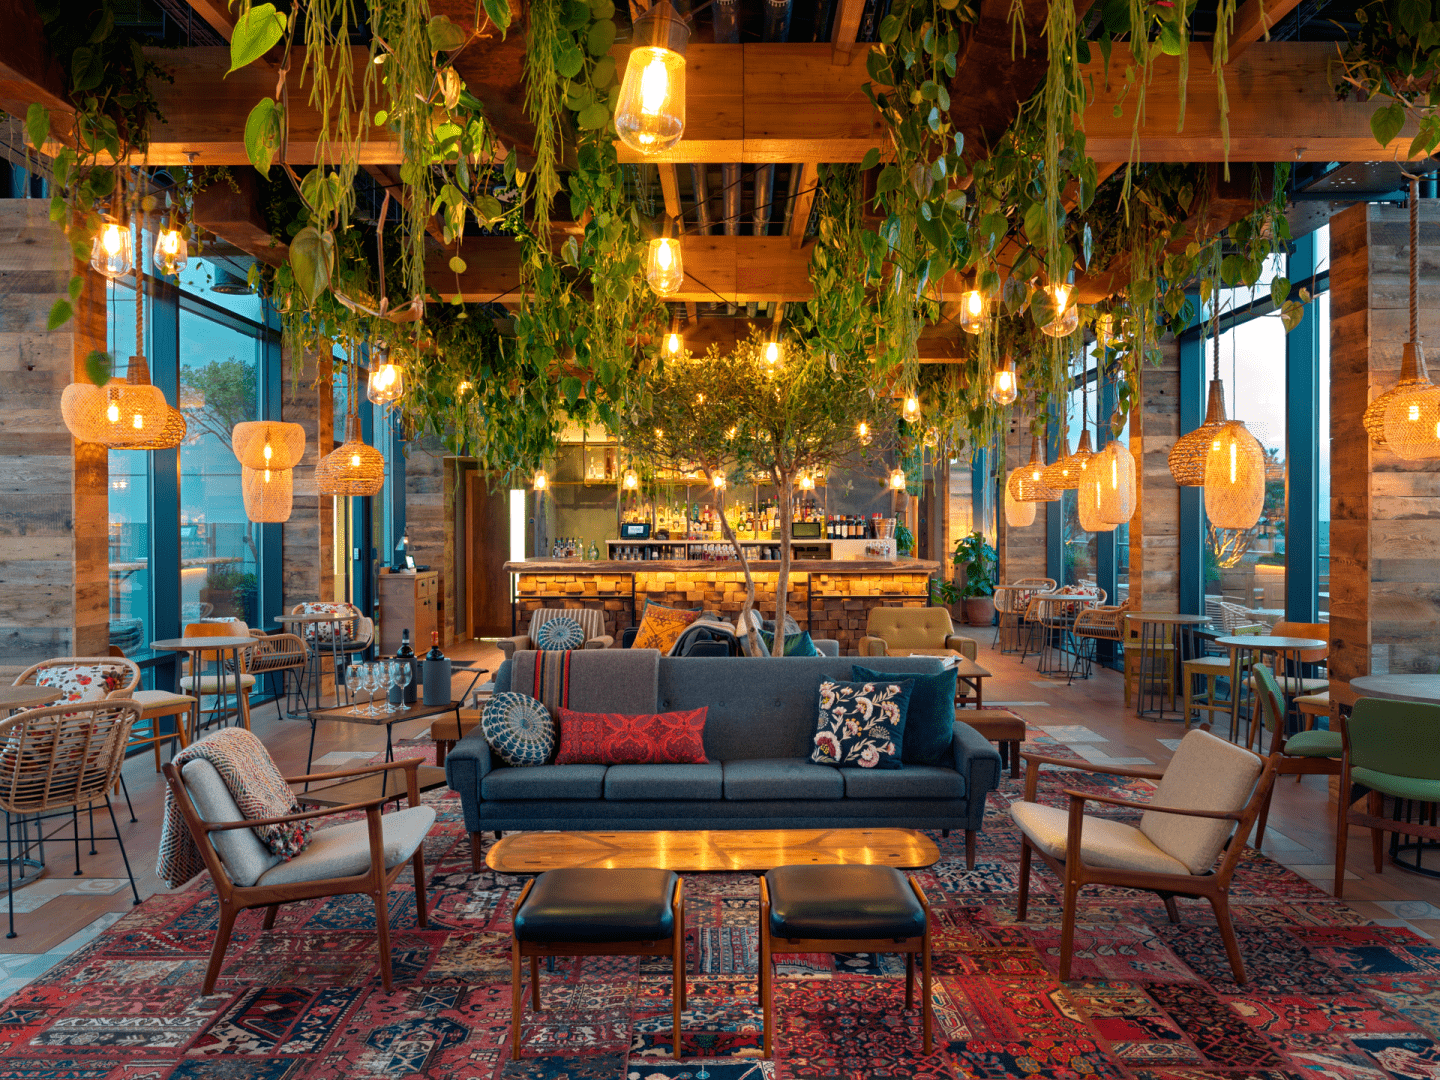 The Nest at Treehouse London